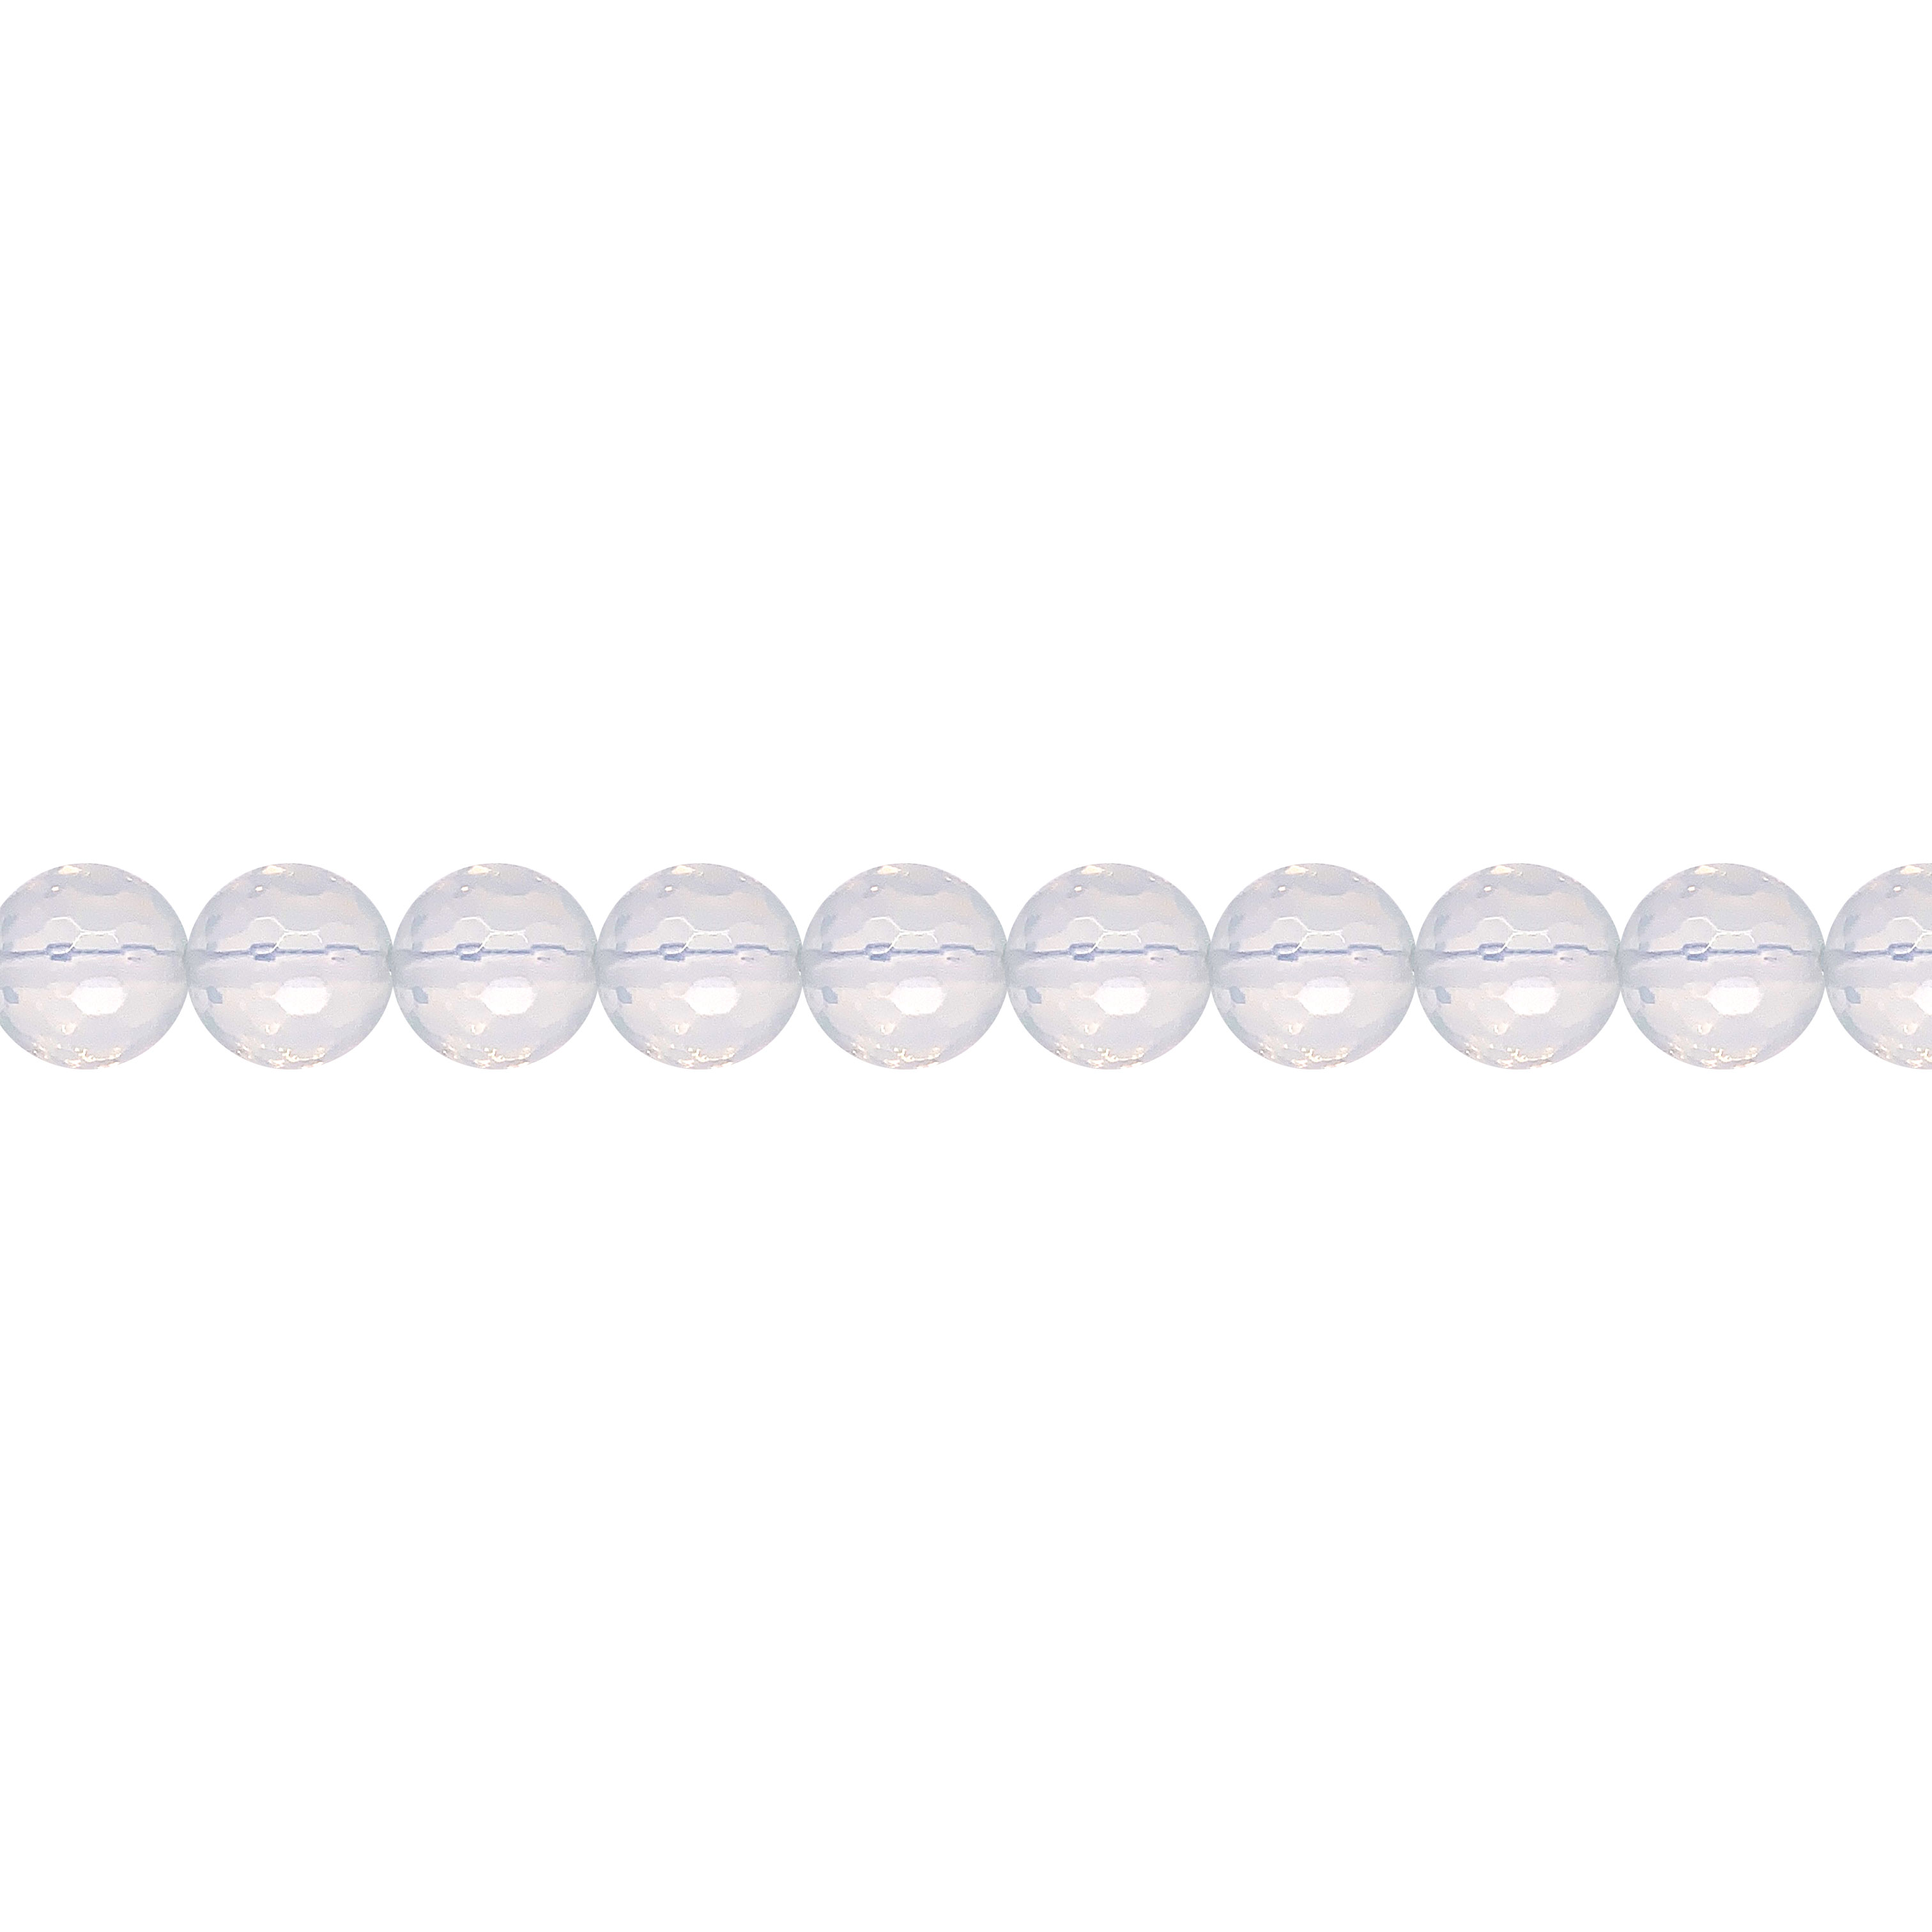 12mm Opalite - Faceted